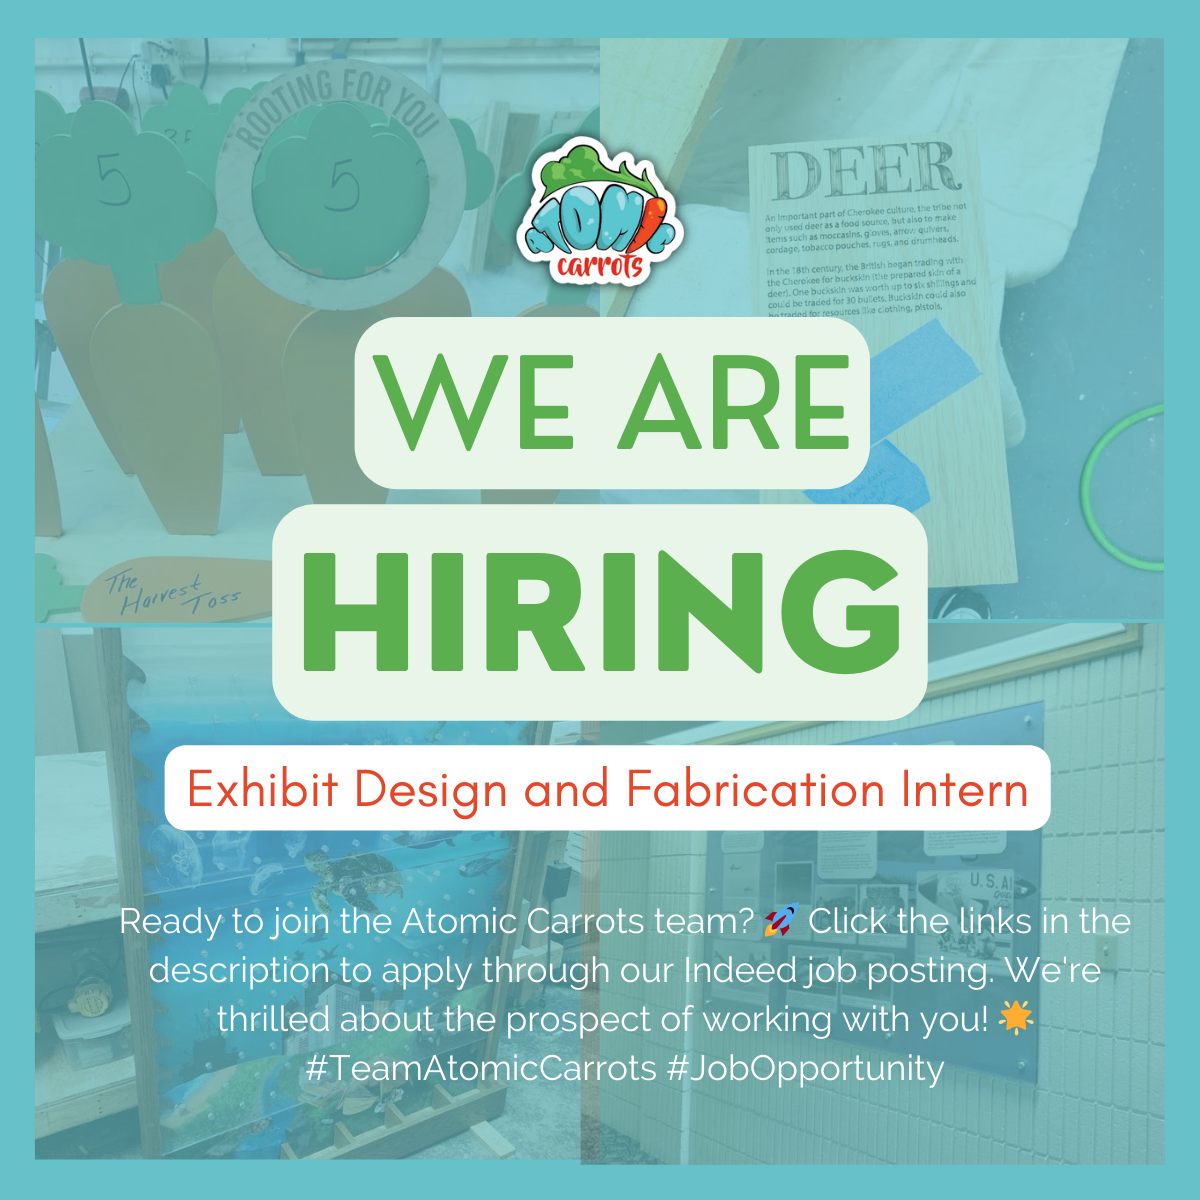 ✨ We're on the hunt for an Exhibit Design and Fabrication Intern